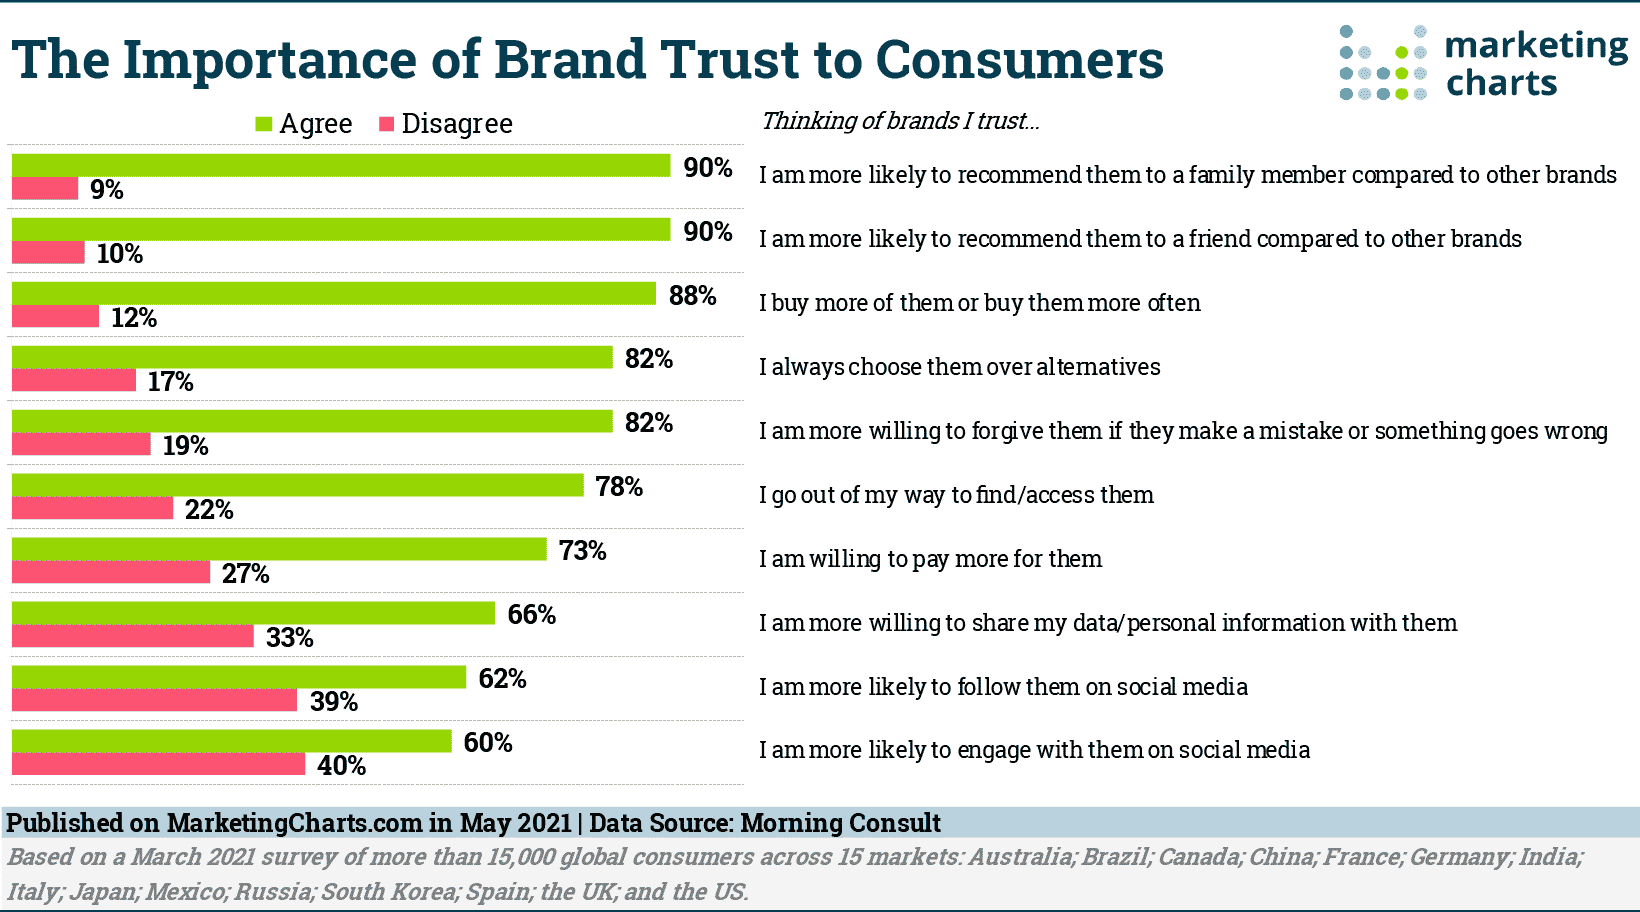 Consumers are more likely to recommend and buy from brands they trust.